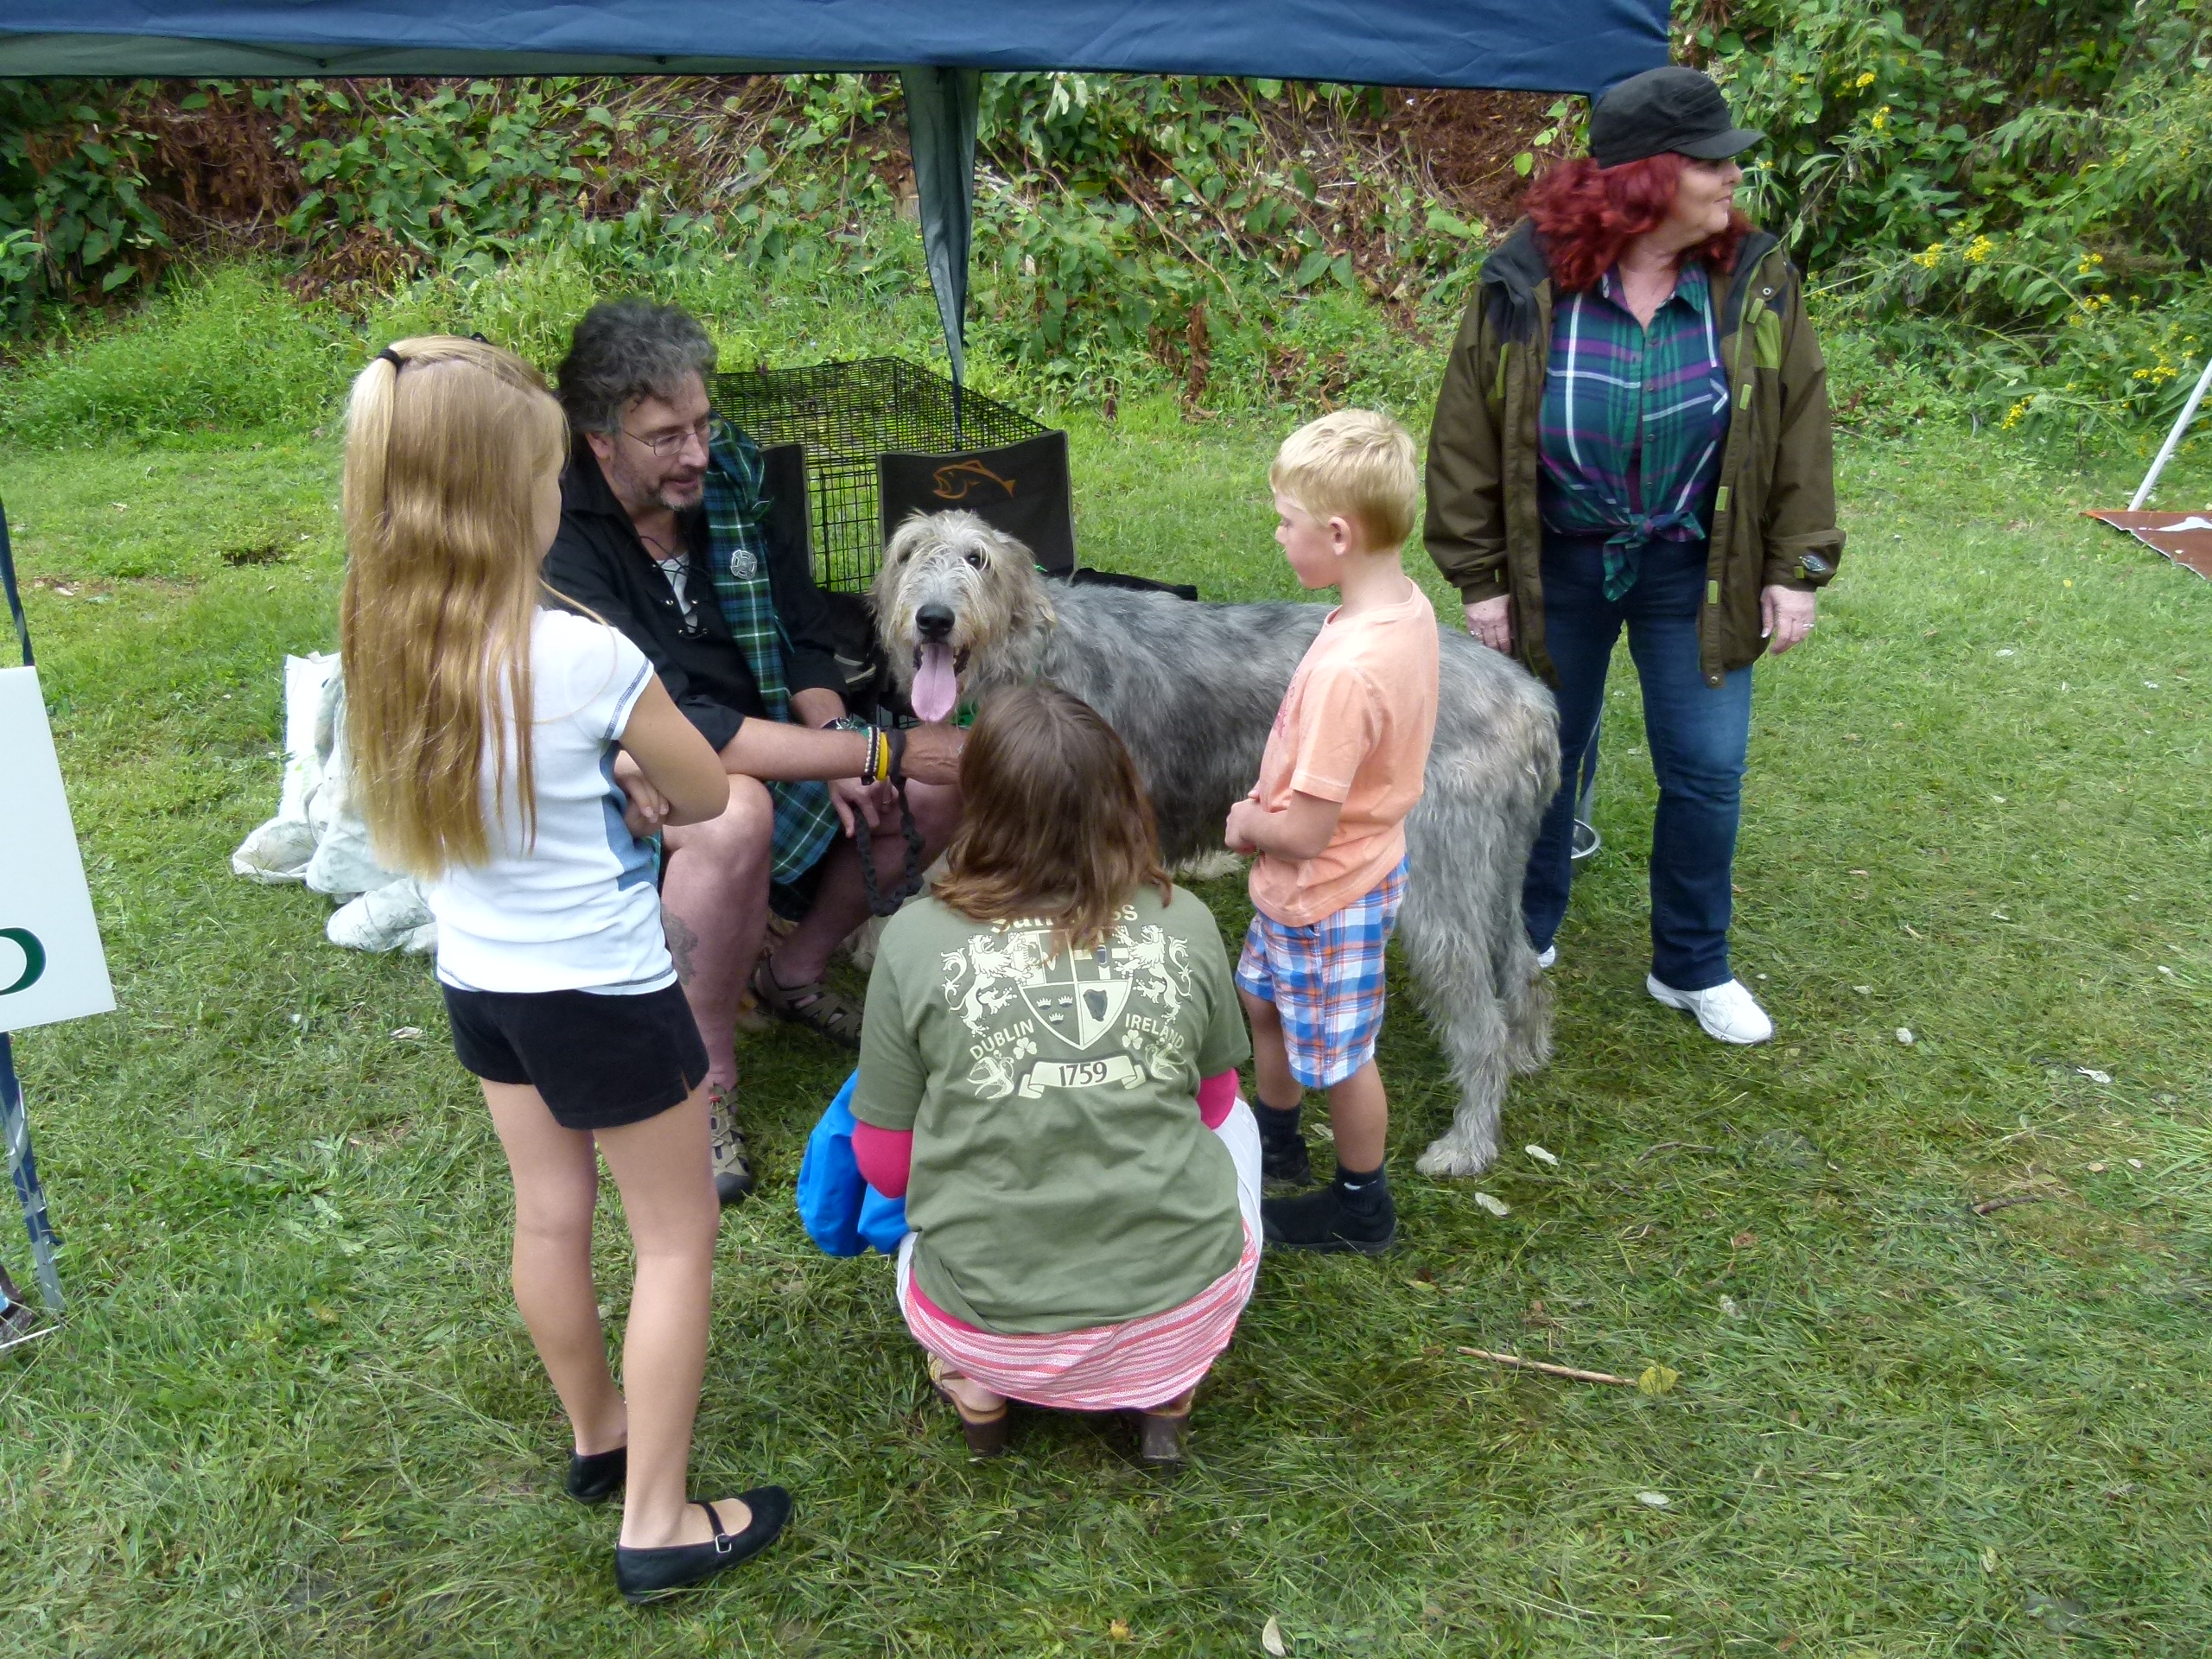 Irish wolfhounds owner Joel Black offers Murphy to the kids for petting.